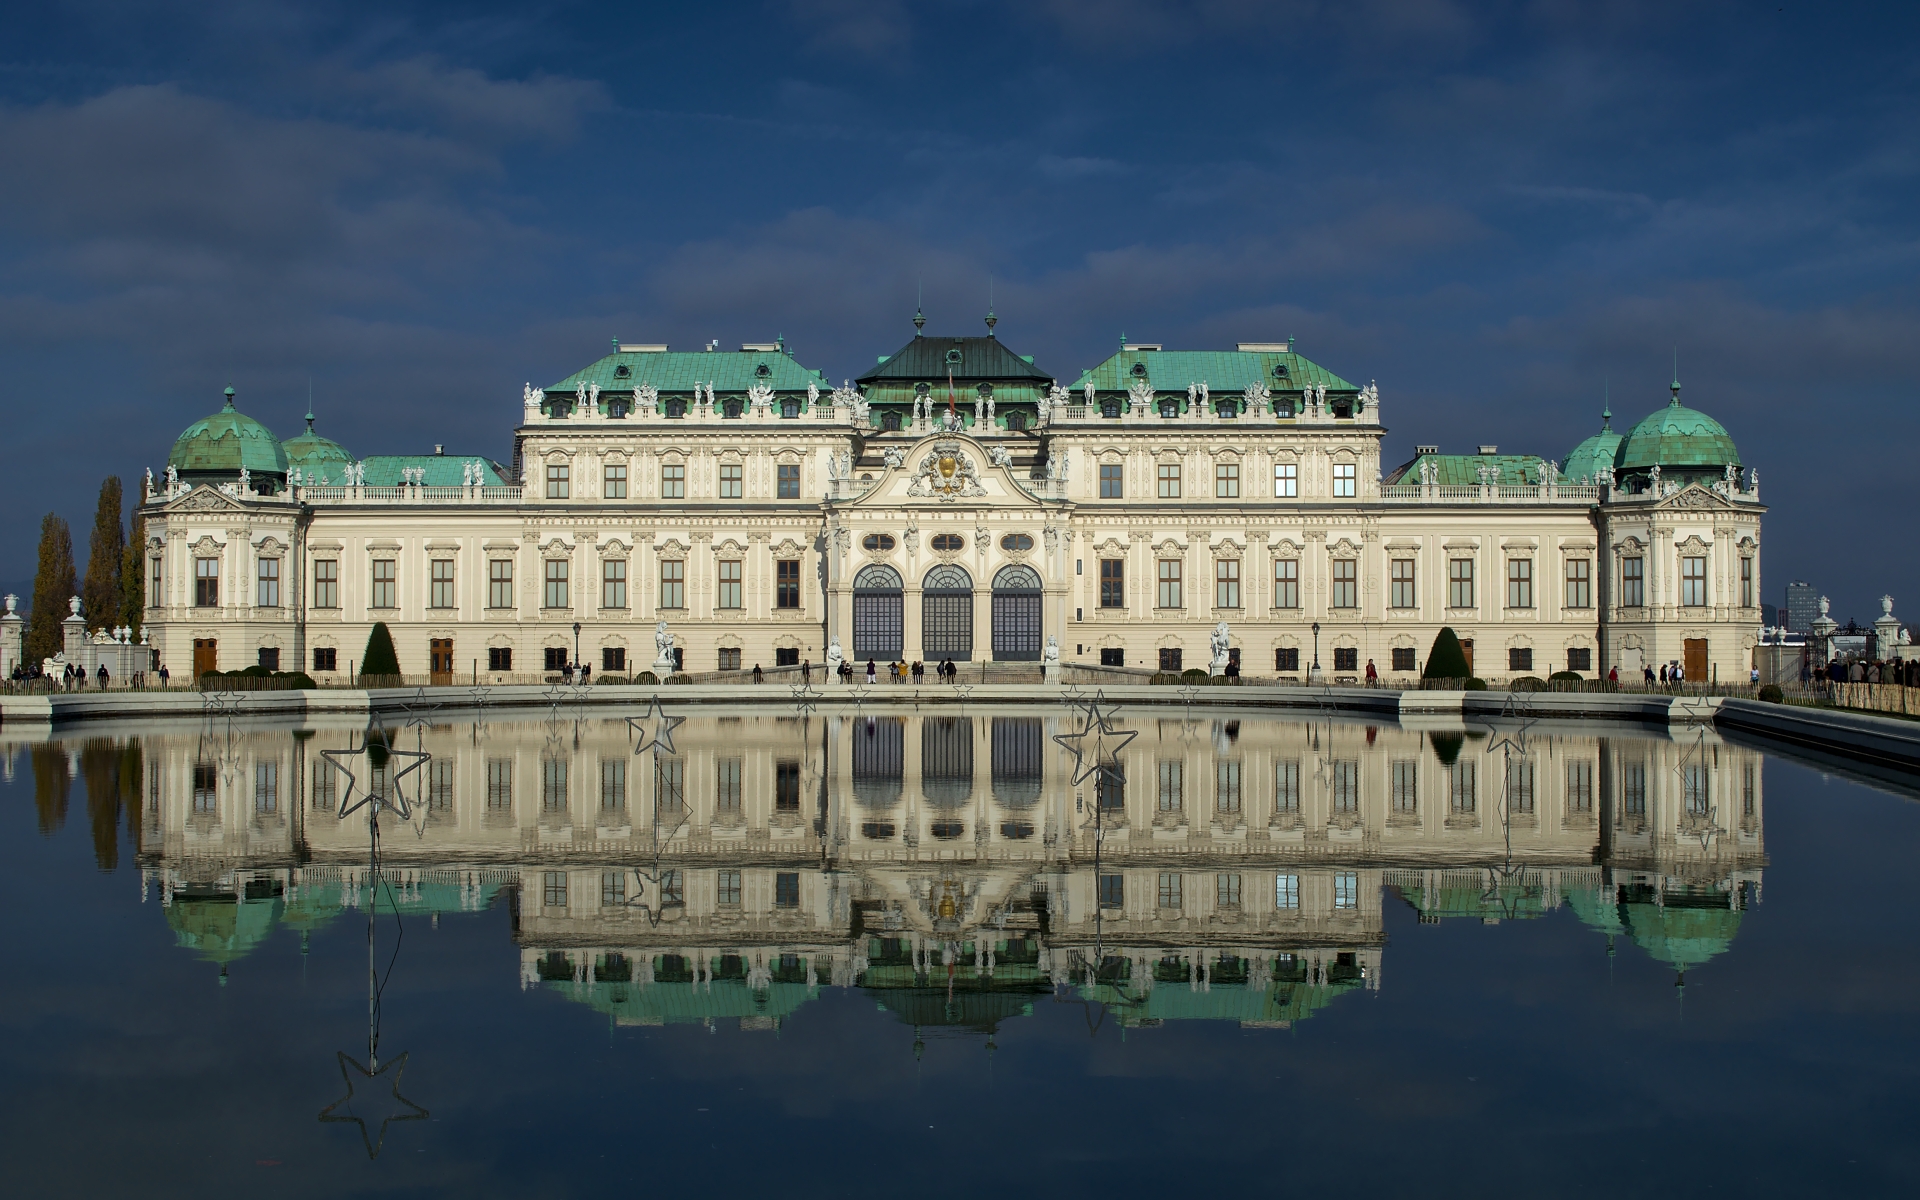 man made, belvedere palace, palaces